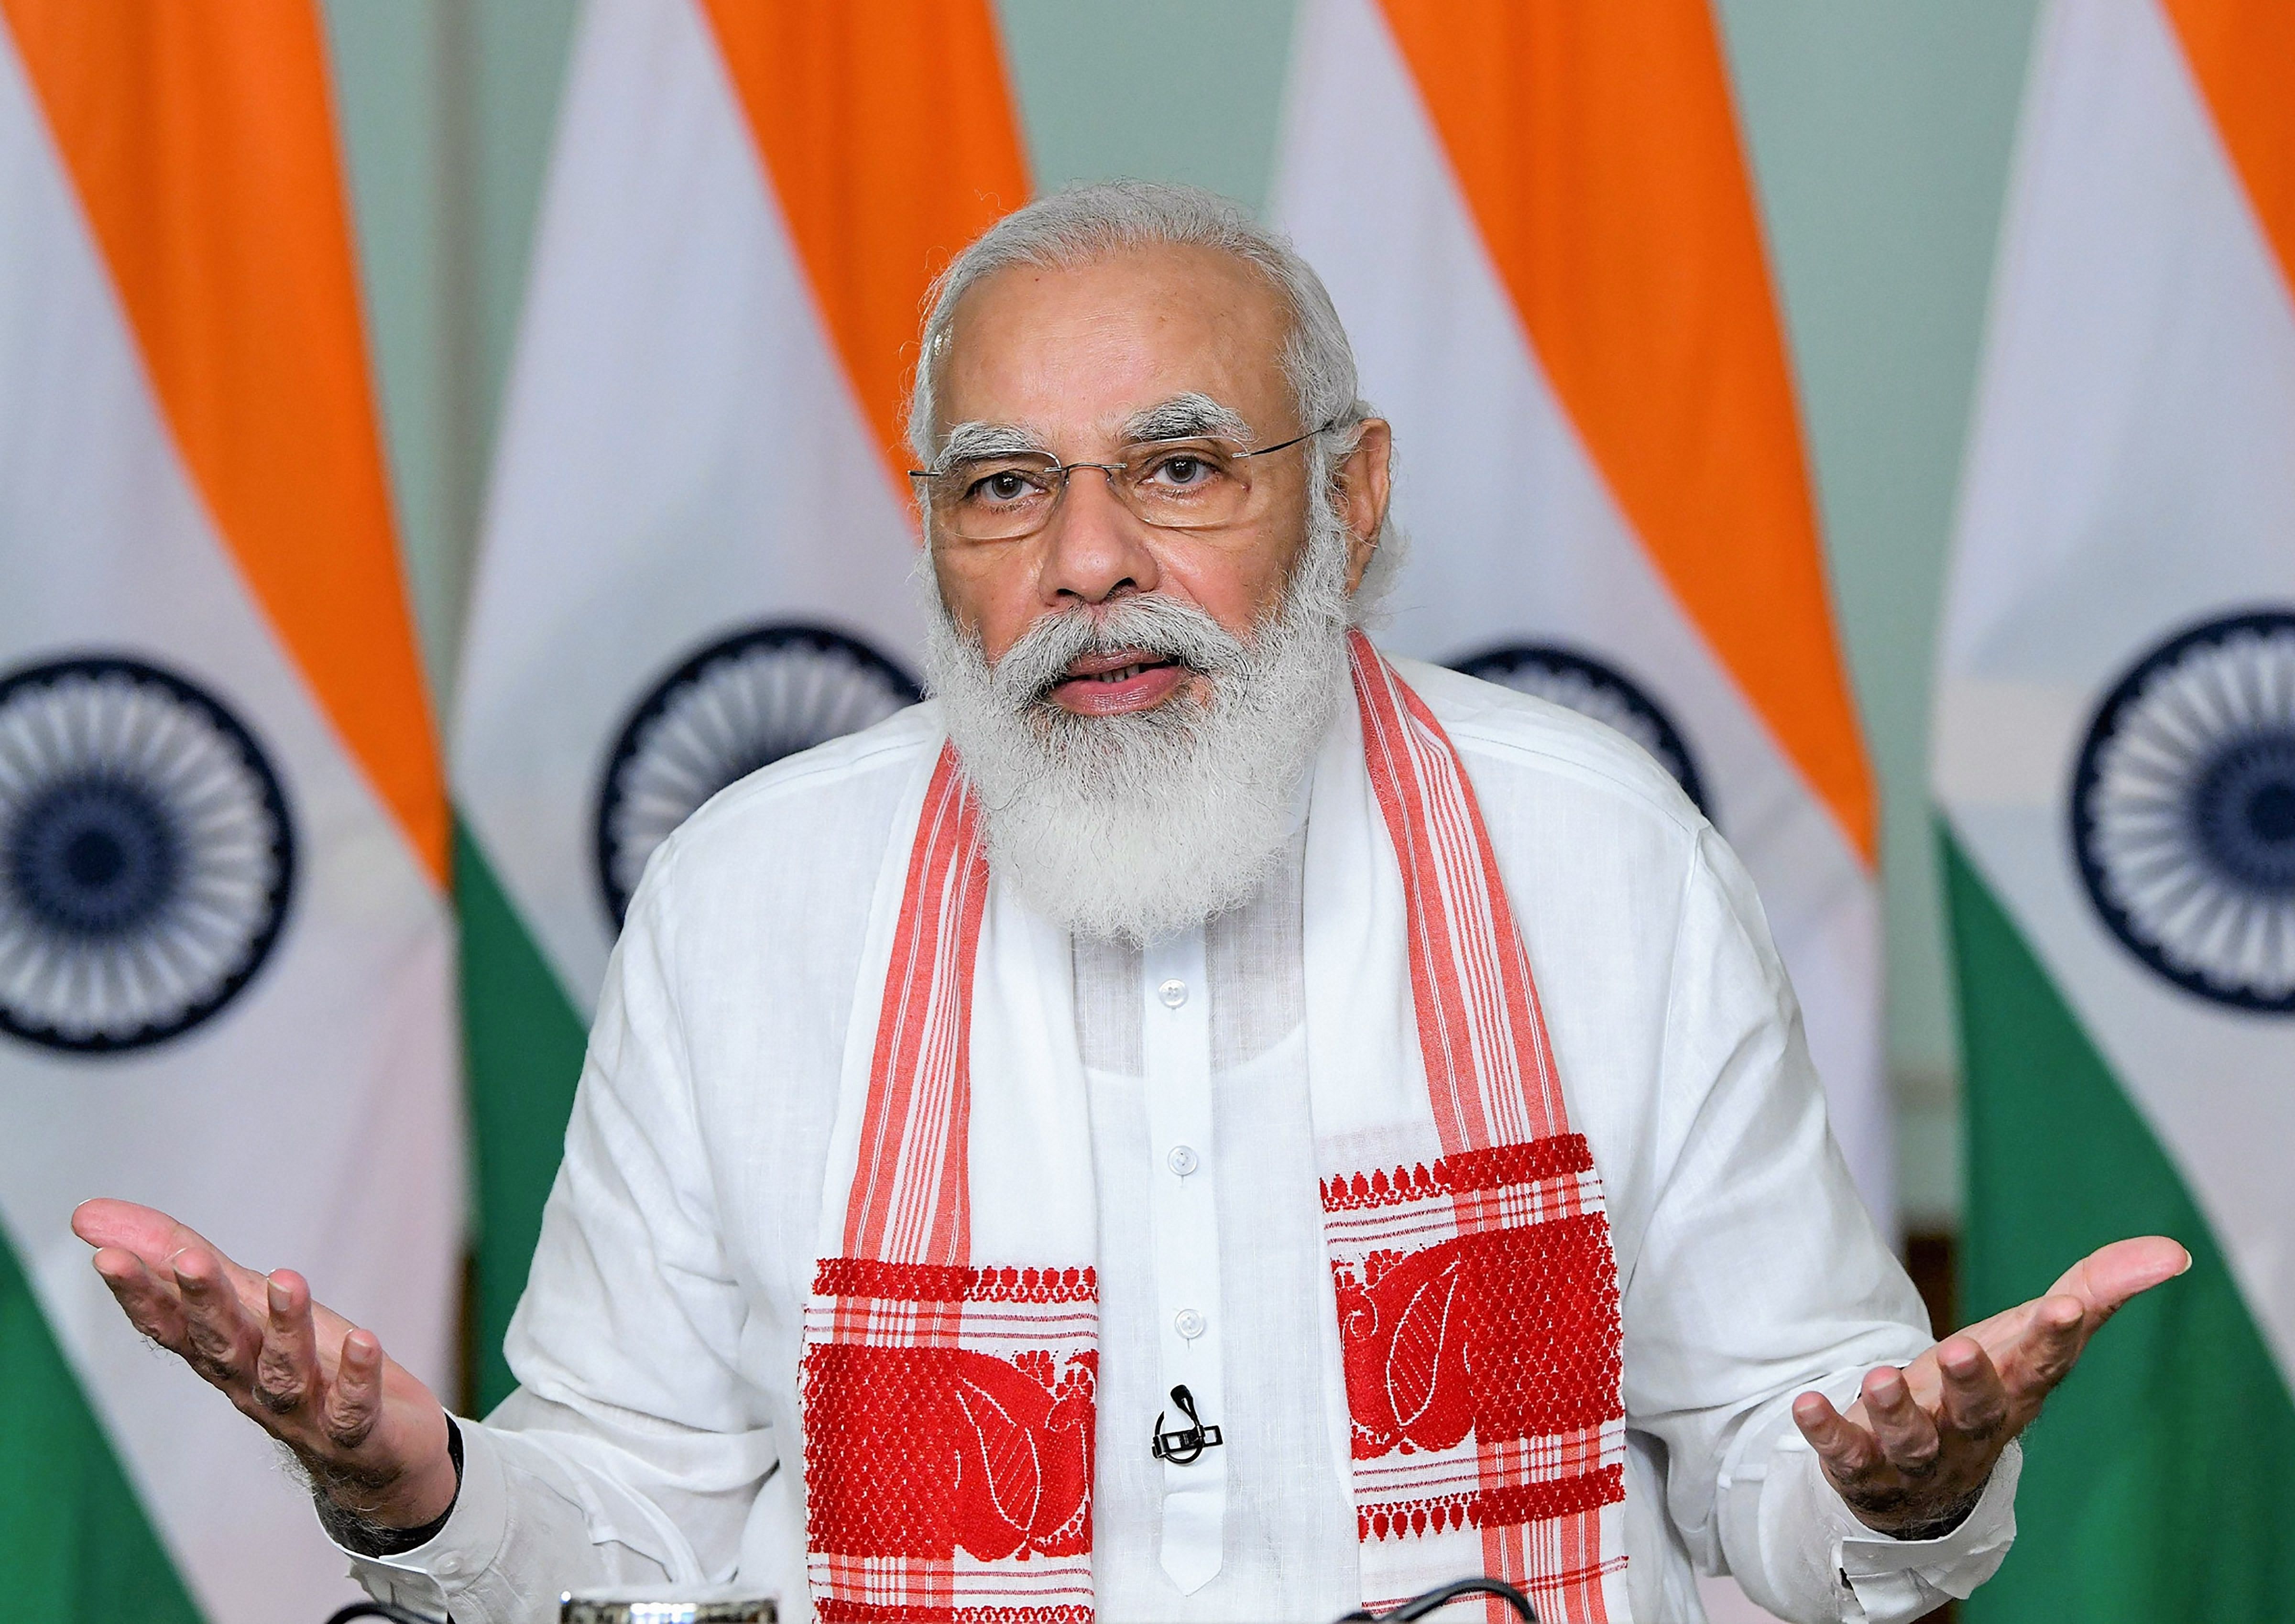 Prime Minister Narendra Modi addresses the convocation of IIT, Guwahati through video conferencing. Credits: PTI Photo